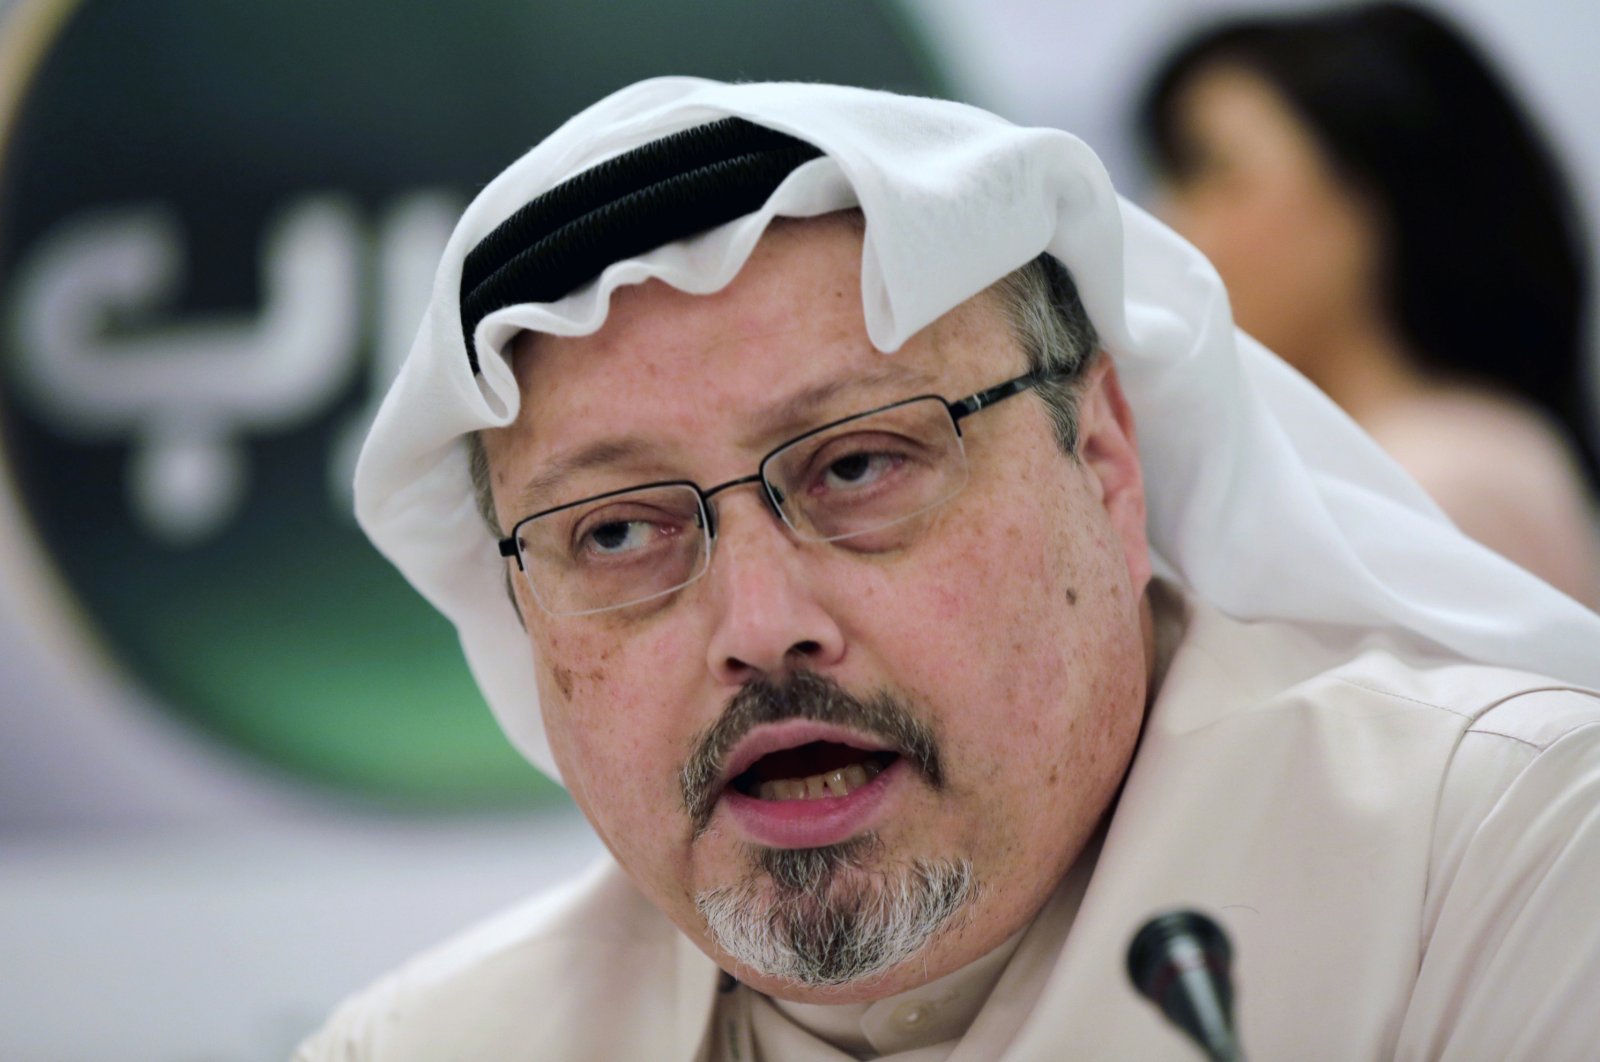 Saudi journalist Jamal Khashoggi speaks during a press conference in Manama, Bahrain on Dec. 15, 2014. A suspect in the 2018 killing of Saudi journalist Jamal Khashoggi was arrested on Dec. 7, 2021, in France, according to a French judicial official. (AP File Photo)